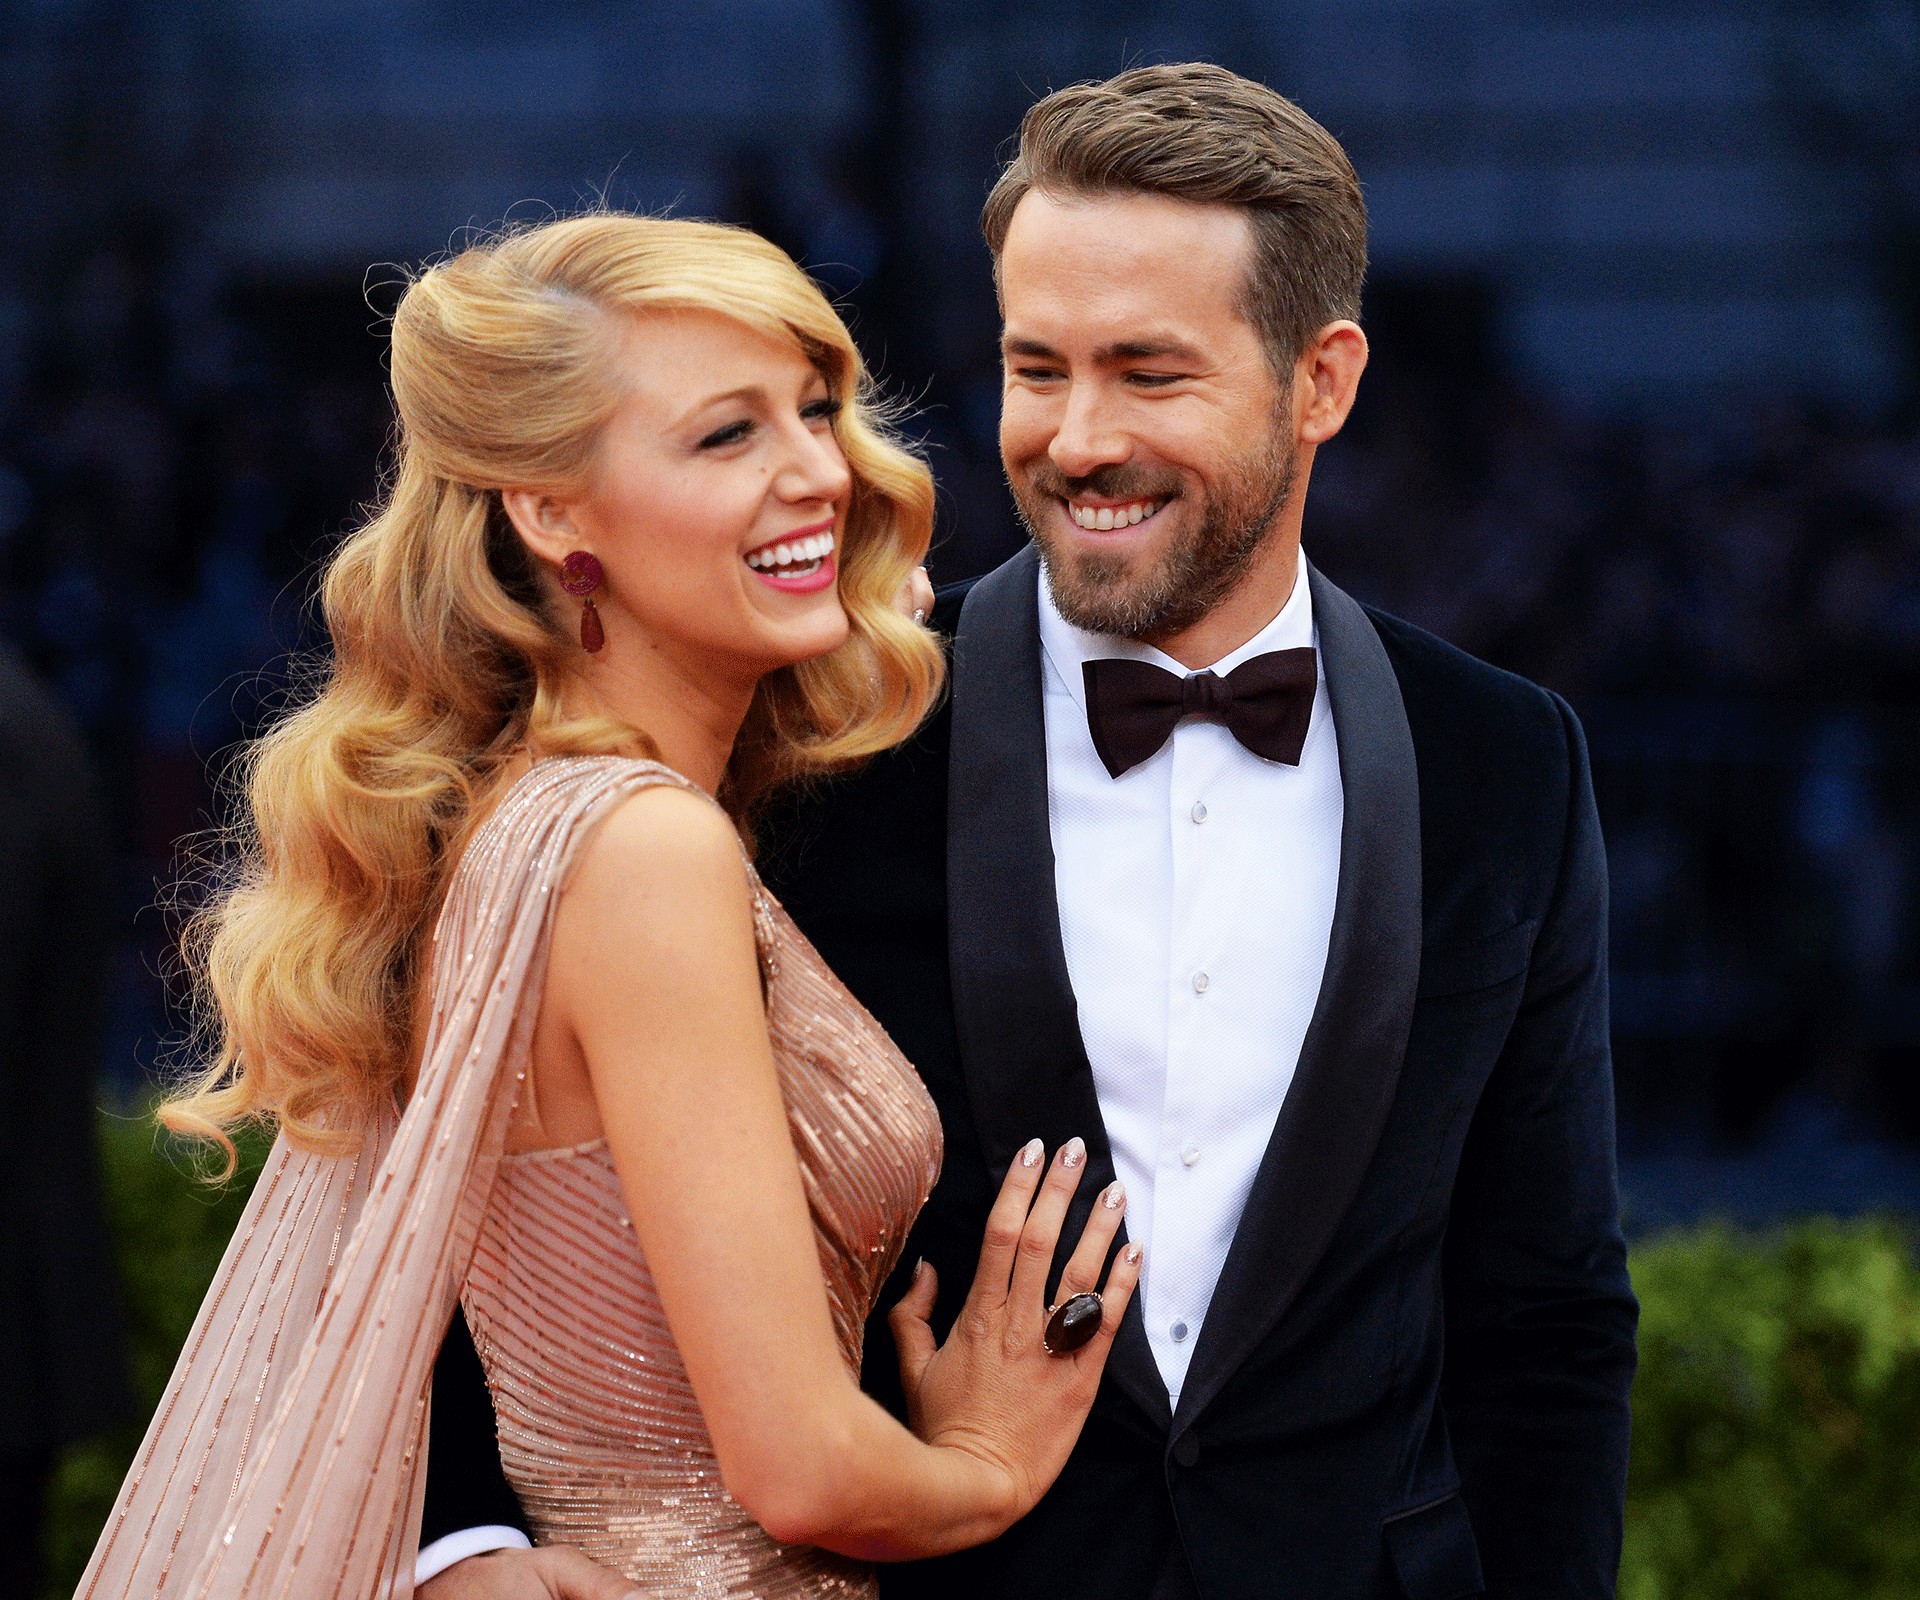 New Parents Ryan Reynolds and Blake Lively 